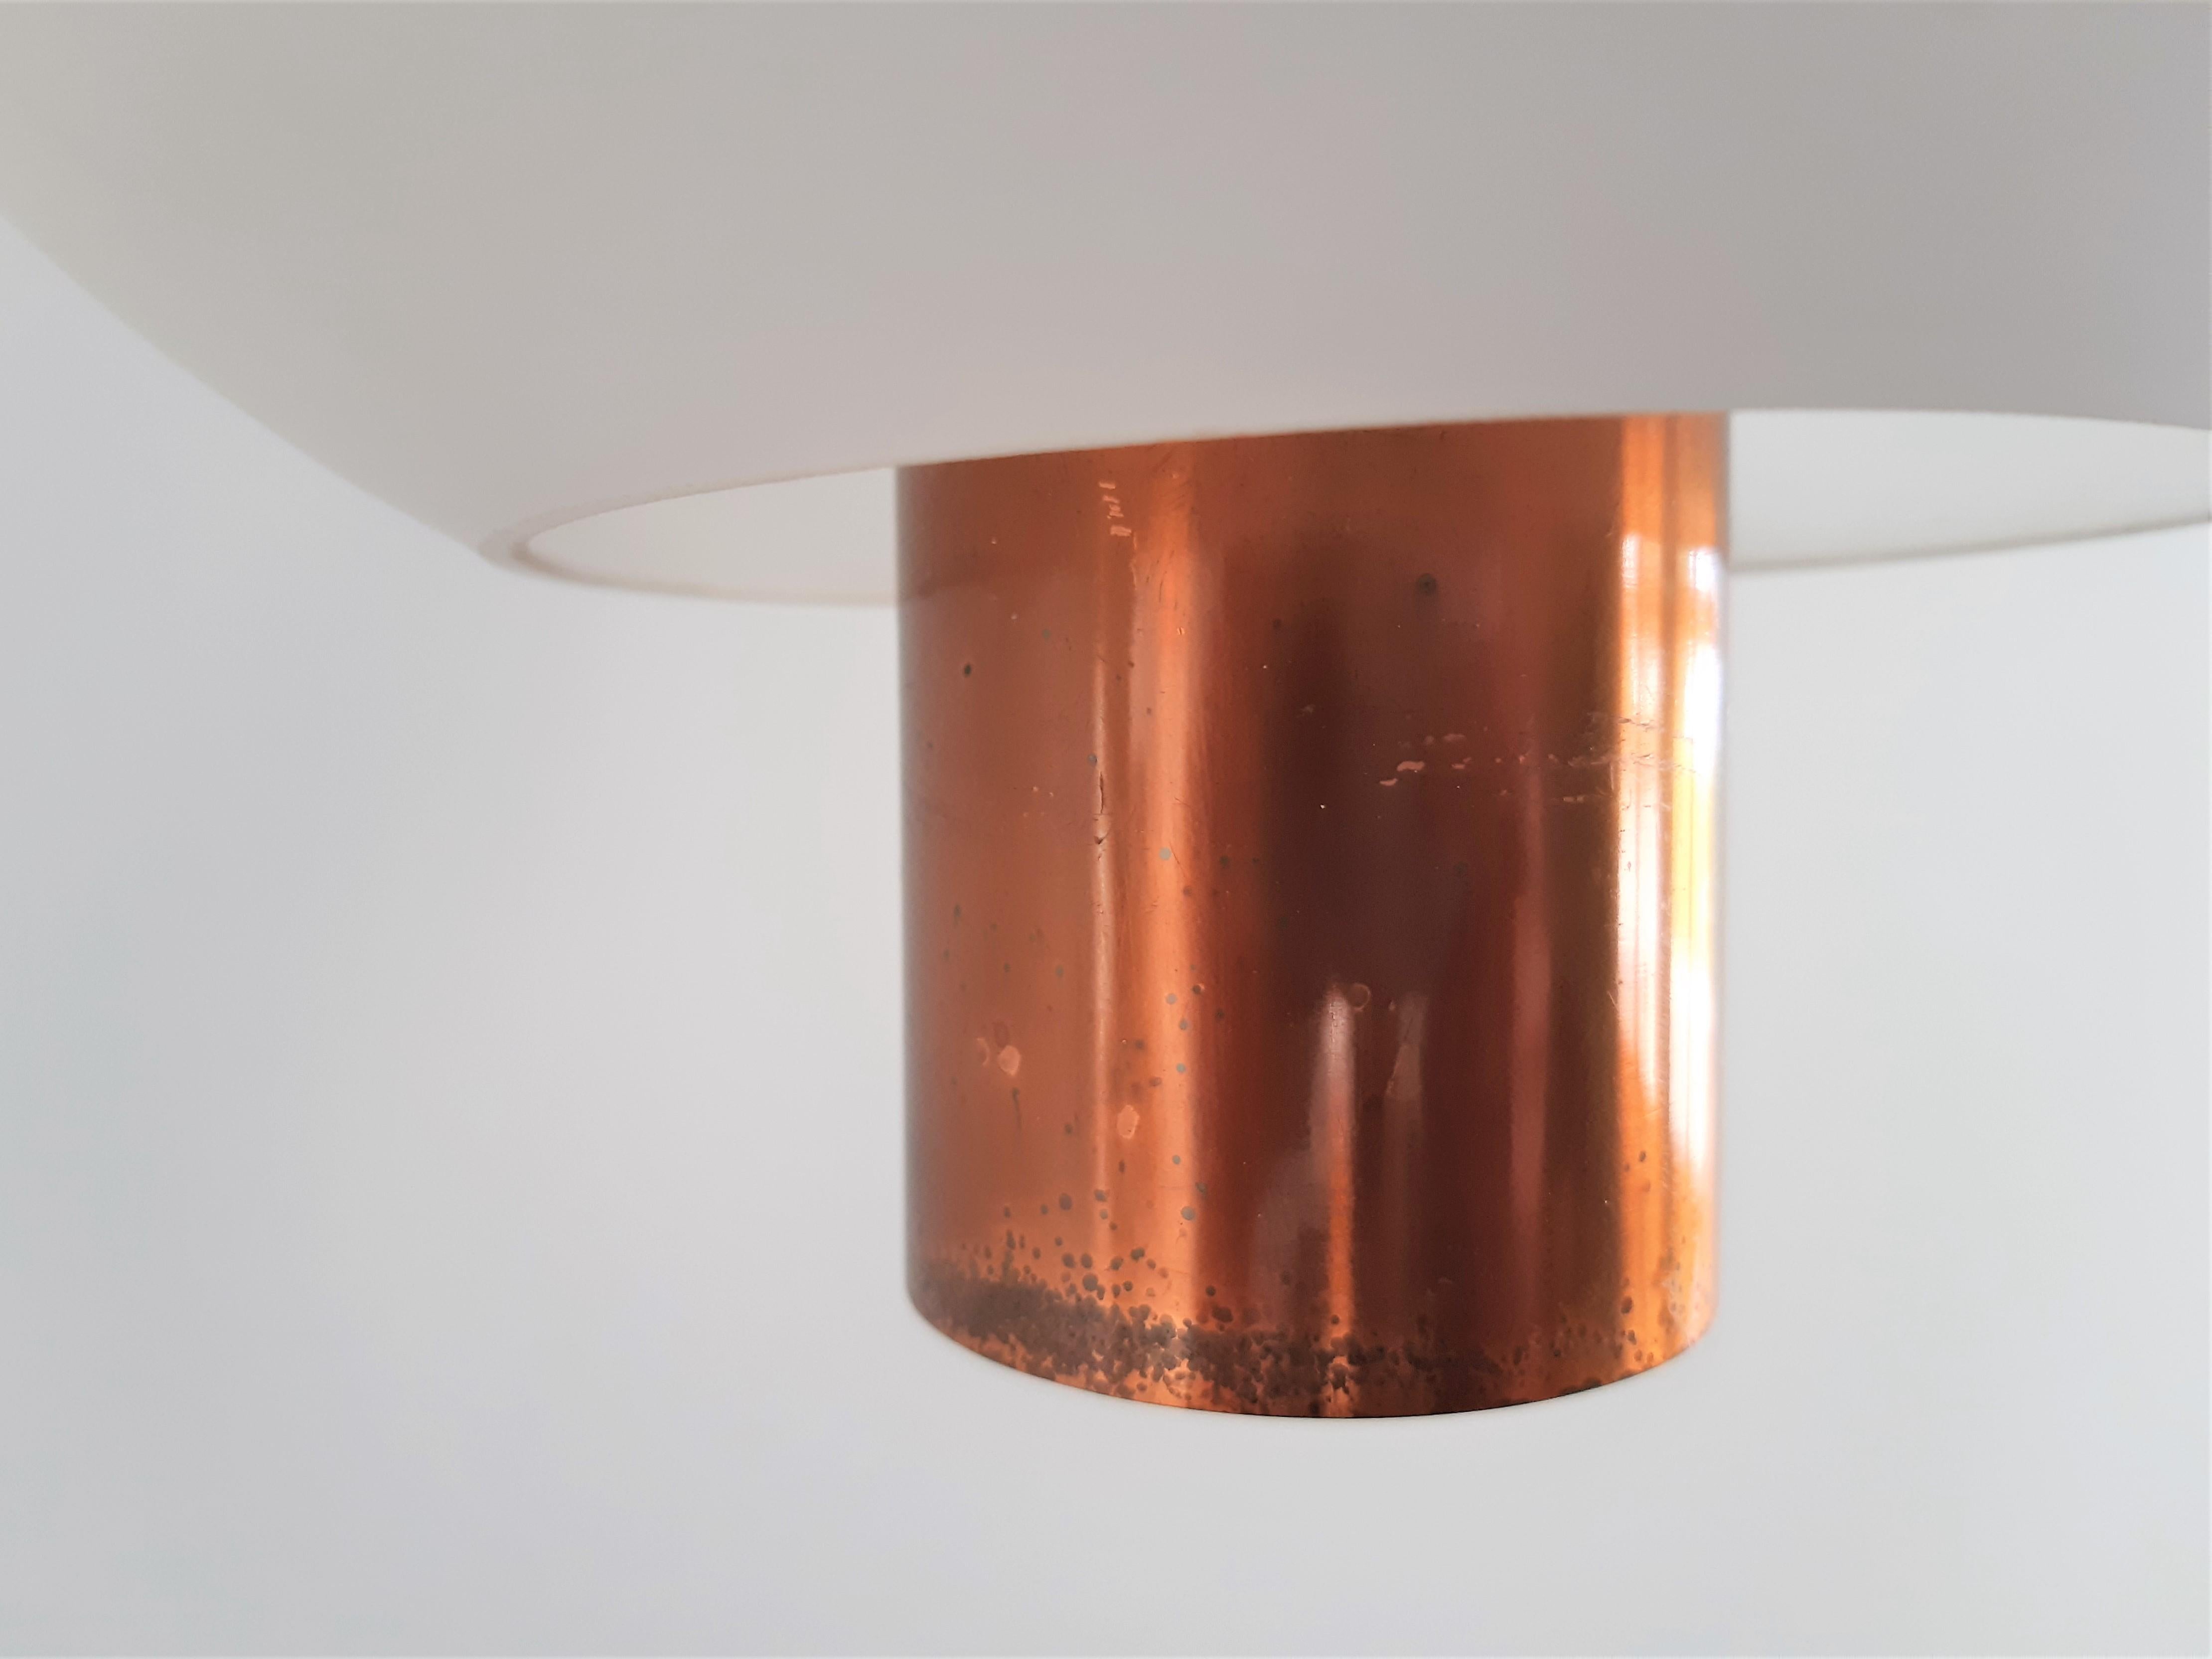 Set of 2 Copper and Glass Pendant Lamps for Hiemsrta Evolux, 1960's In Good Condition For Sale In Steenwijk, NL